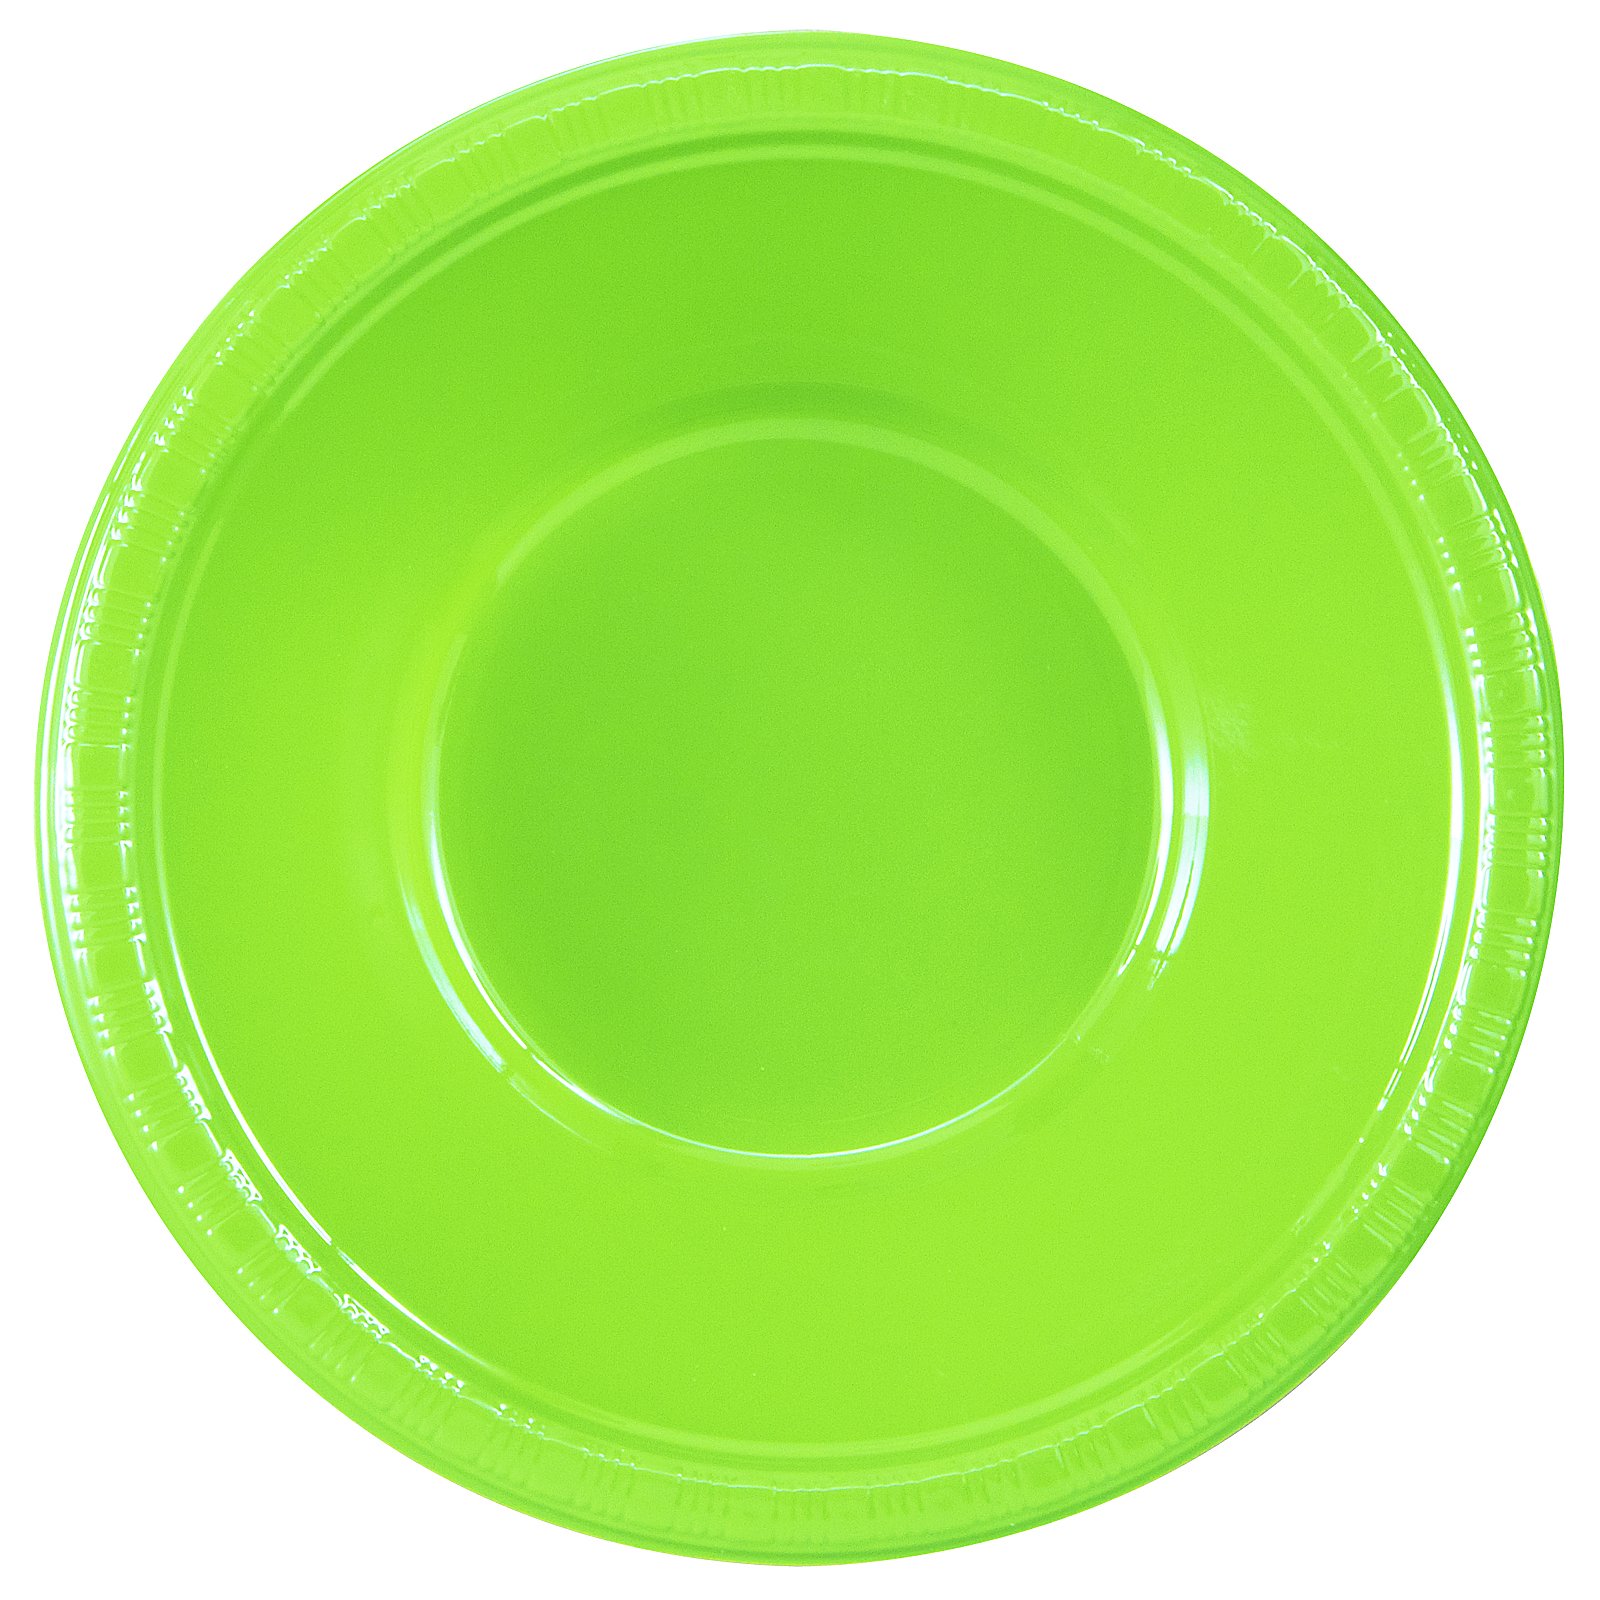 Fresh Lime (Lime Green) Plastic Bowls (20 count)